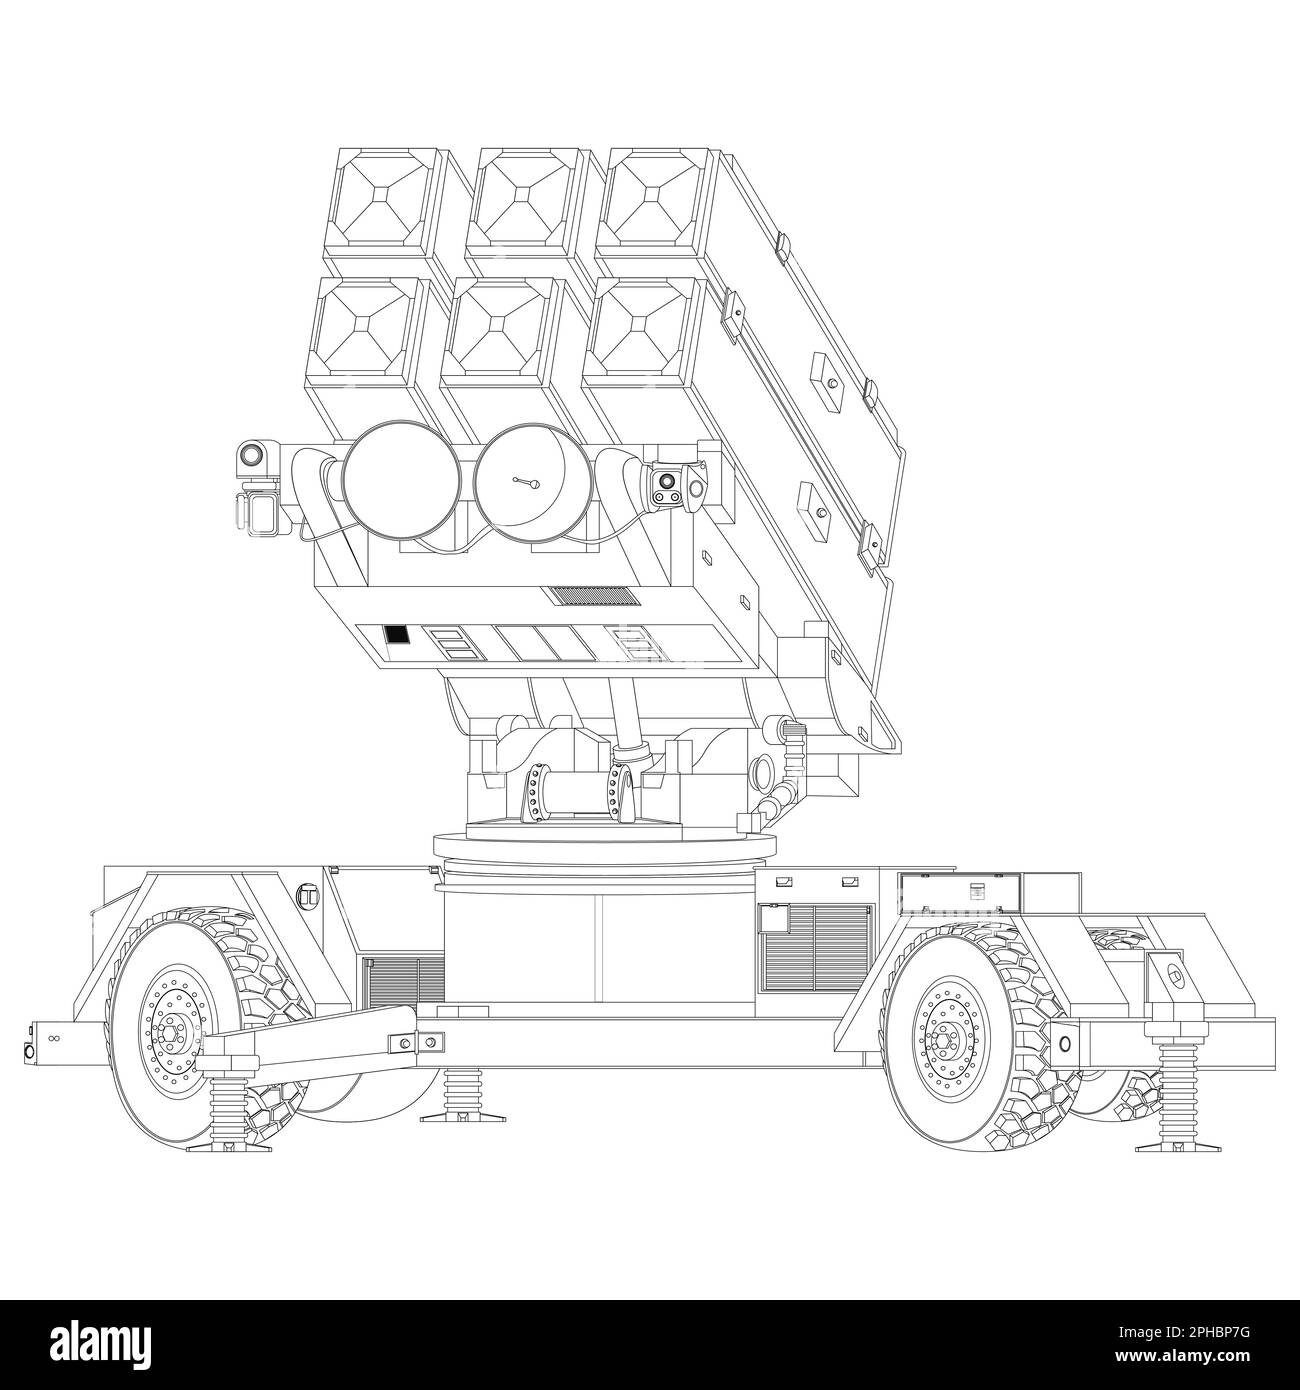 Anti - aircraft air defense system Aspide Coloring Book. Skyguard NASAMS. MIM-104 Patriot. Vector illustration isolated on white background. Stock Vector